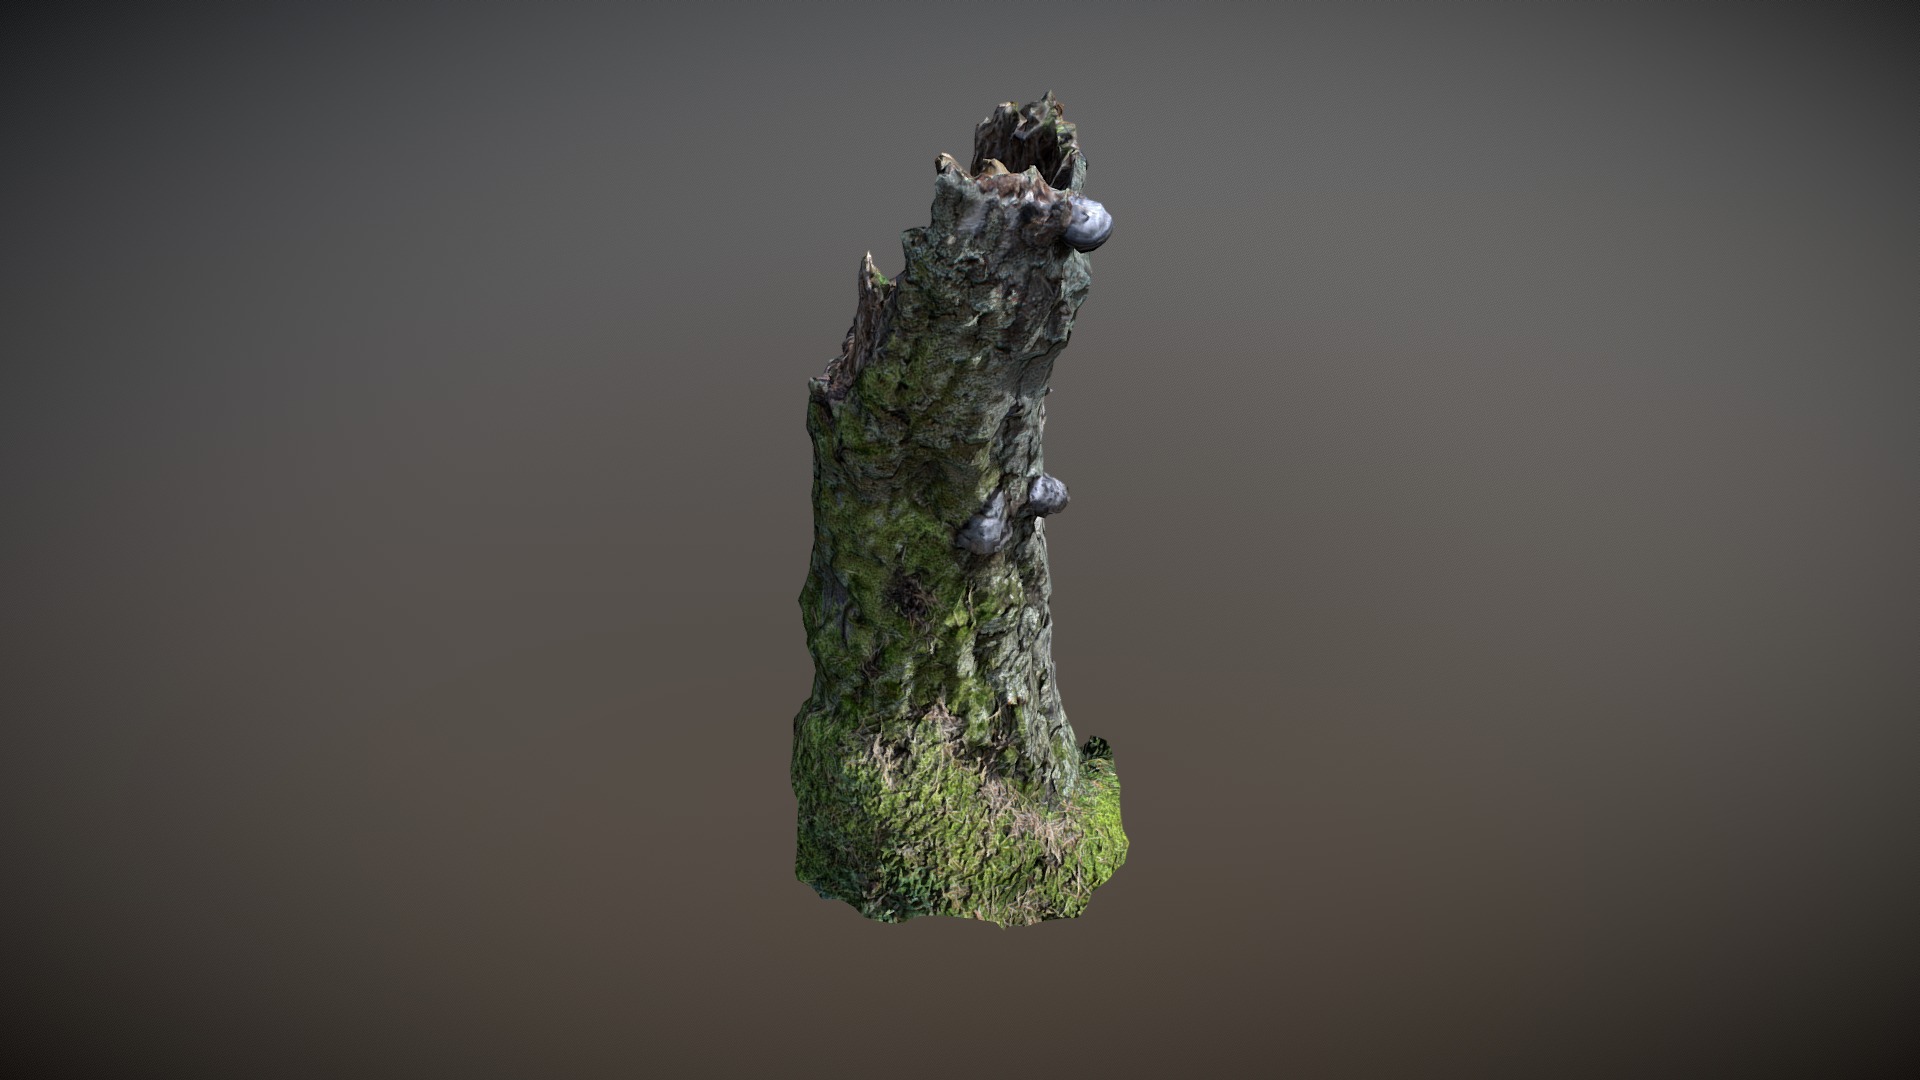 3D model Nature Forest Stuff 007 - This is a 3D model of the Nature Forest Stuff 007. The 3D model is about a tree with a small figure on it.